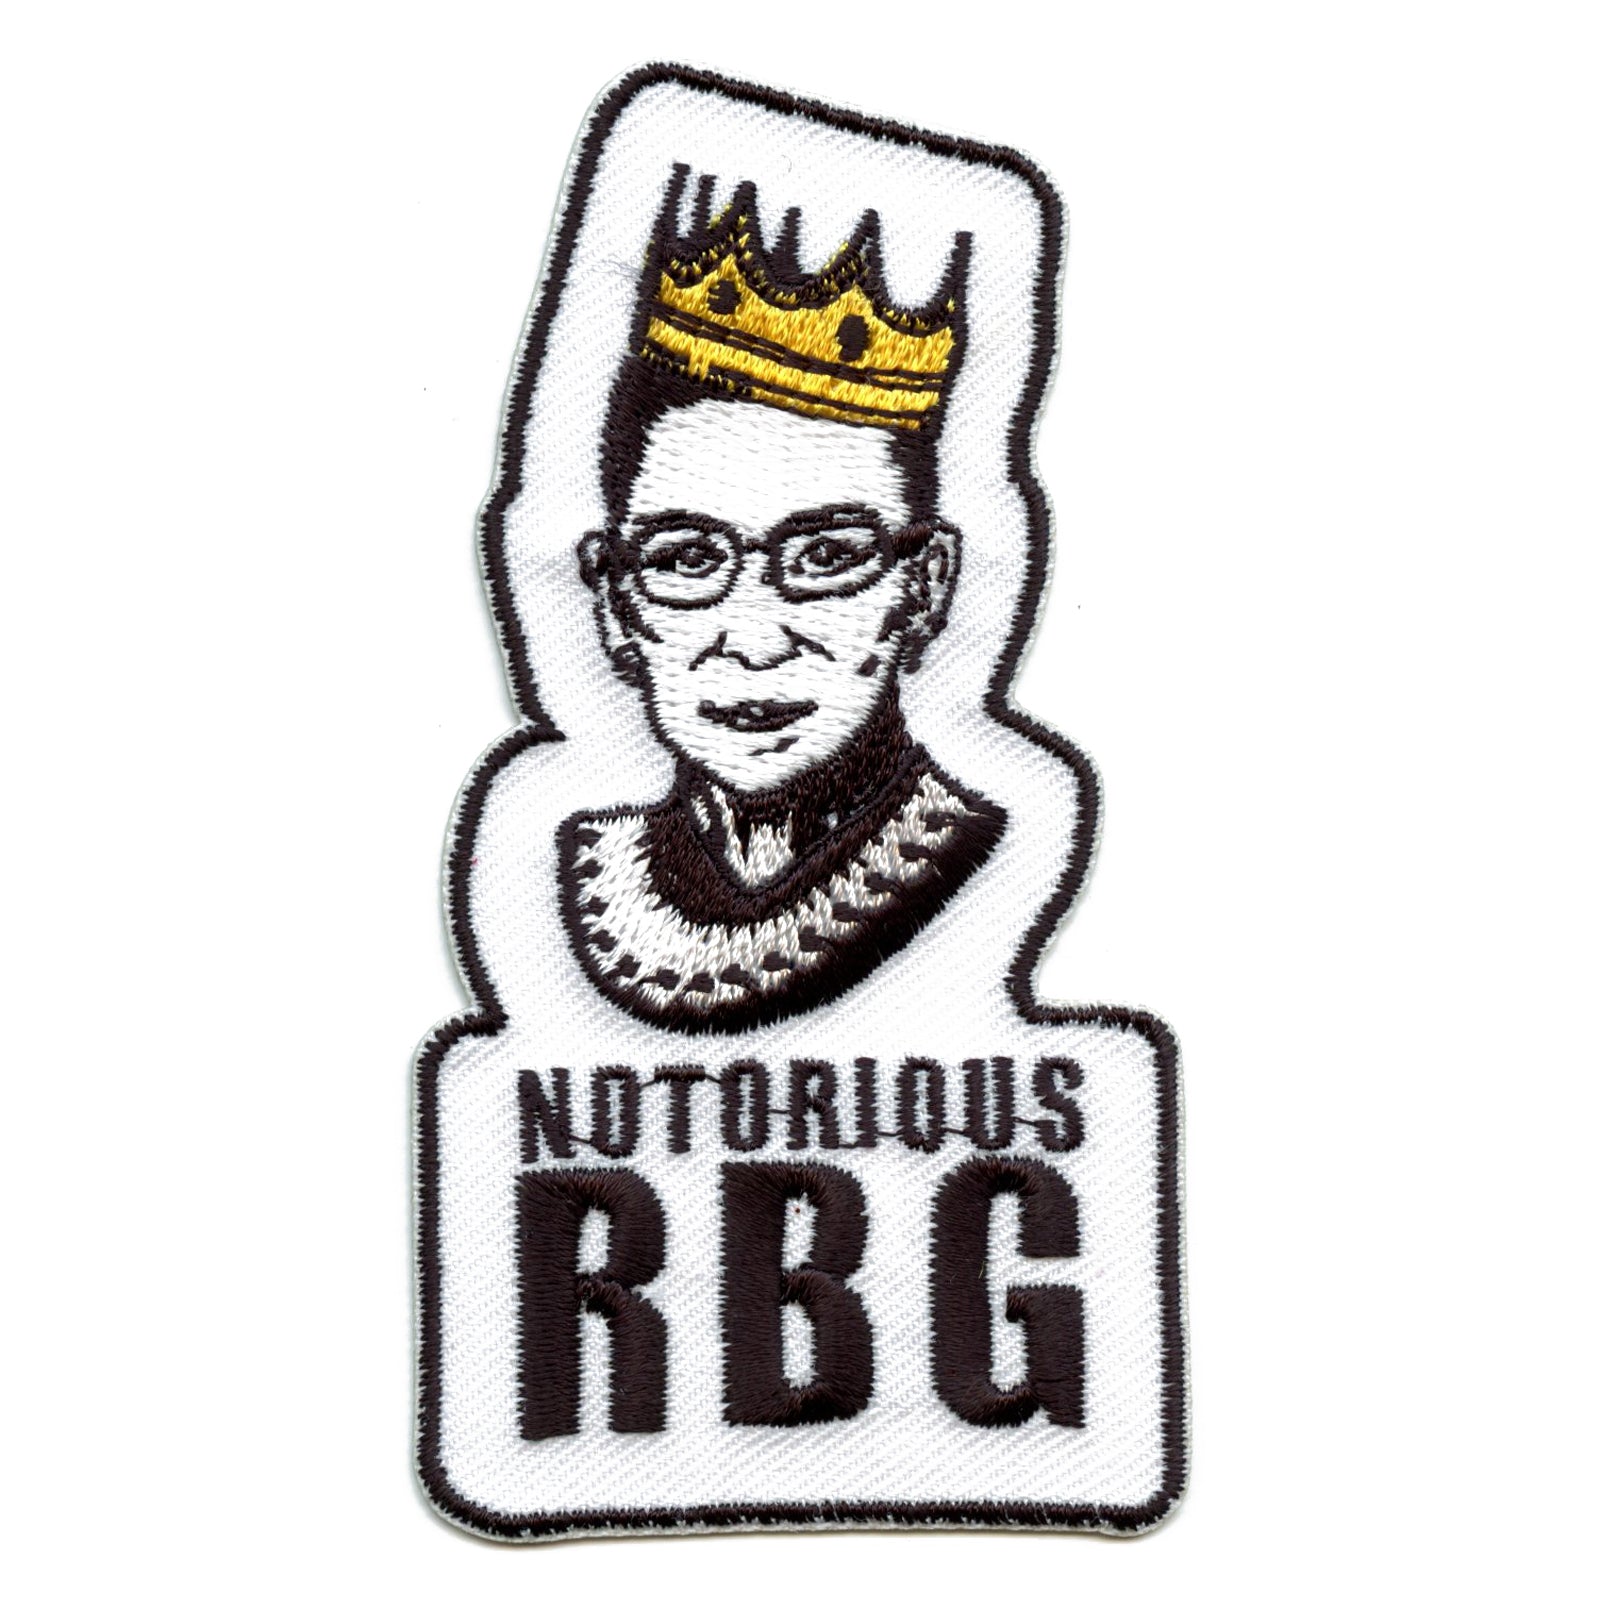 Notorious Ruth Bader Ginsburg Portrait With Crown Embroidered Iron On Patch 